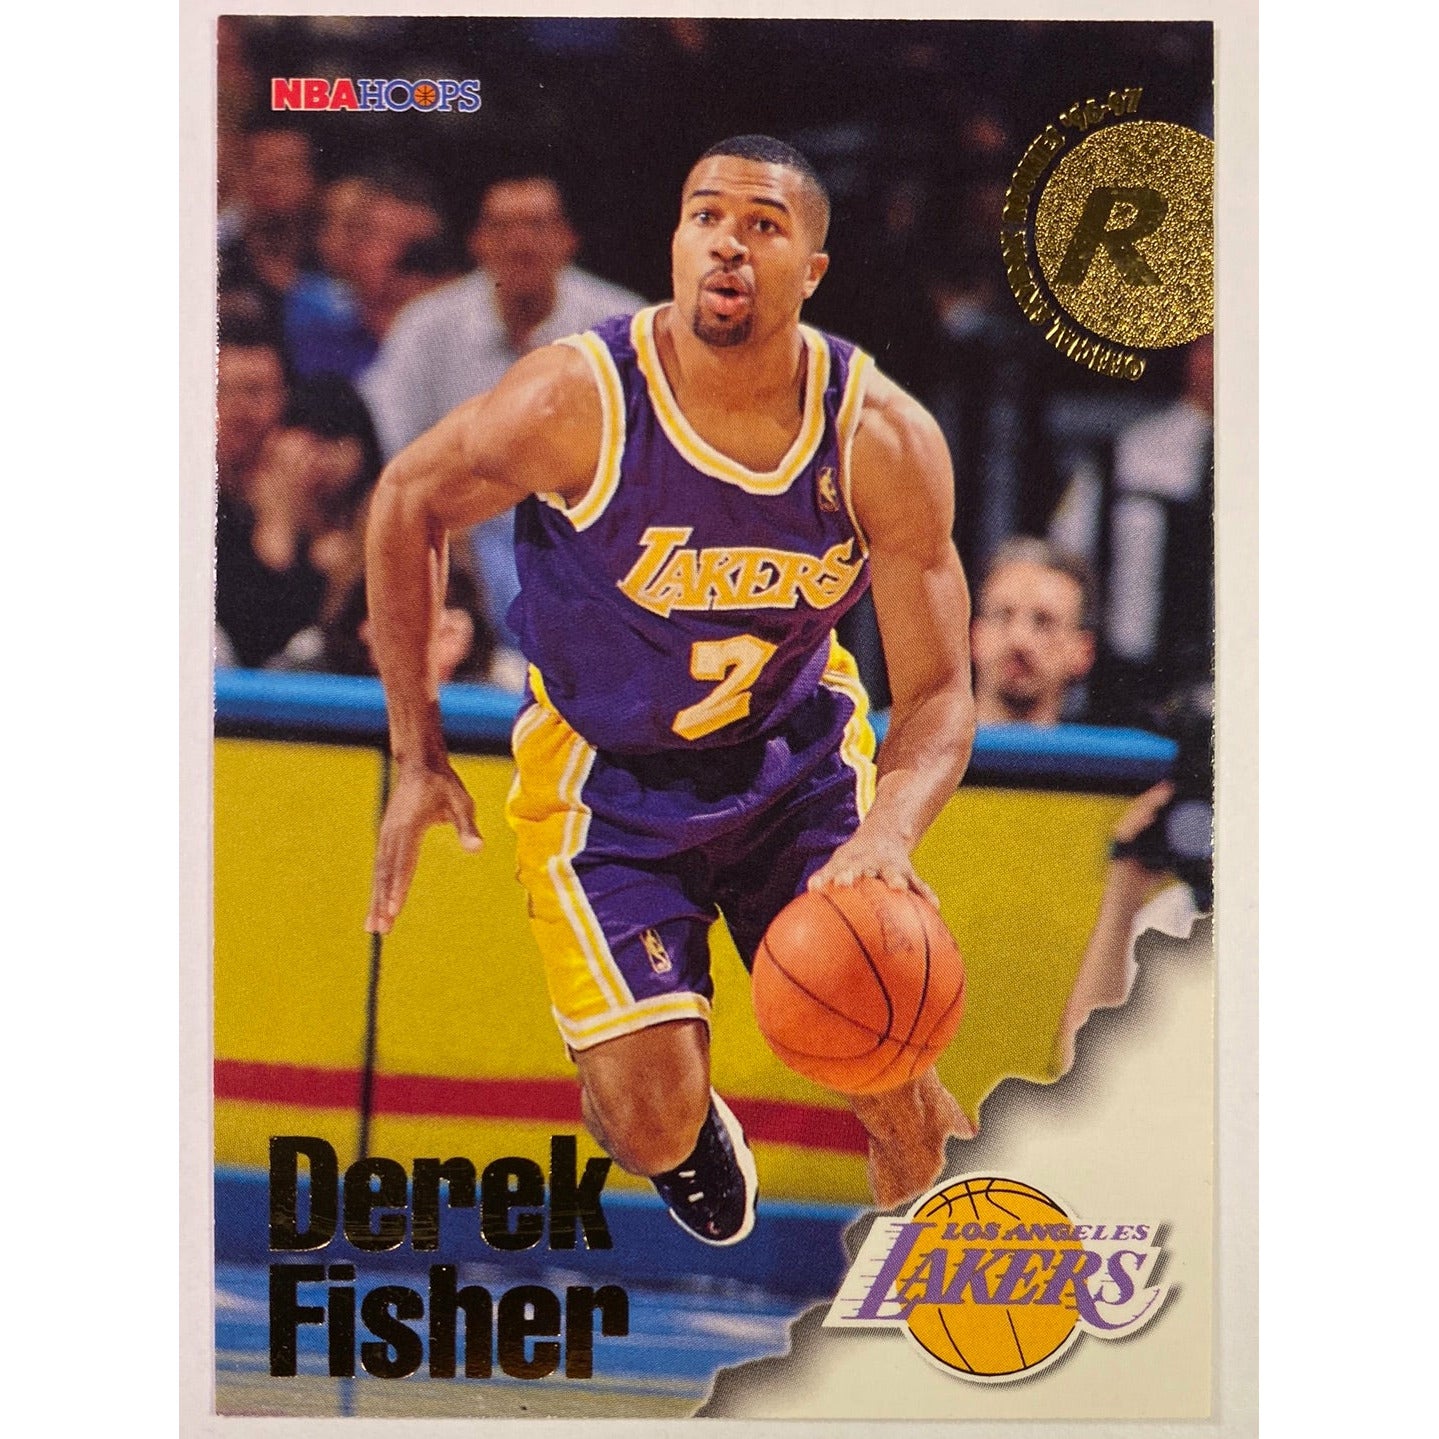  1996-97 Skybox Derek Fisher Official Skybox Rookies  Local Legends Cards & Collectibles